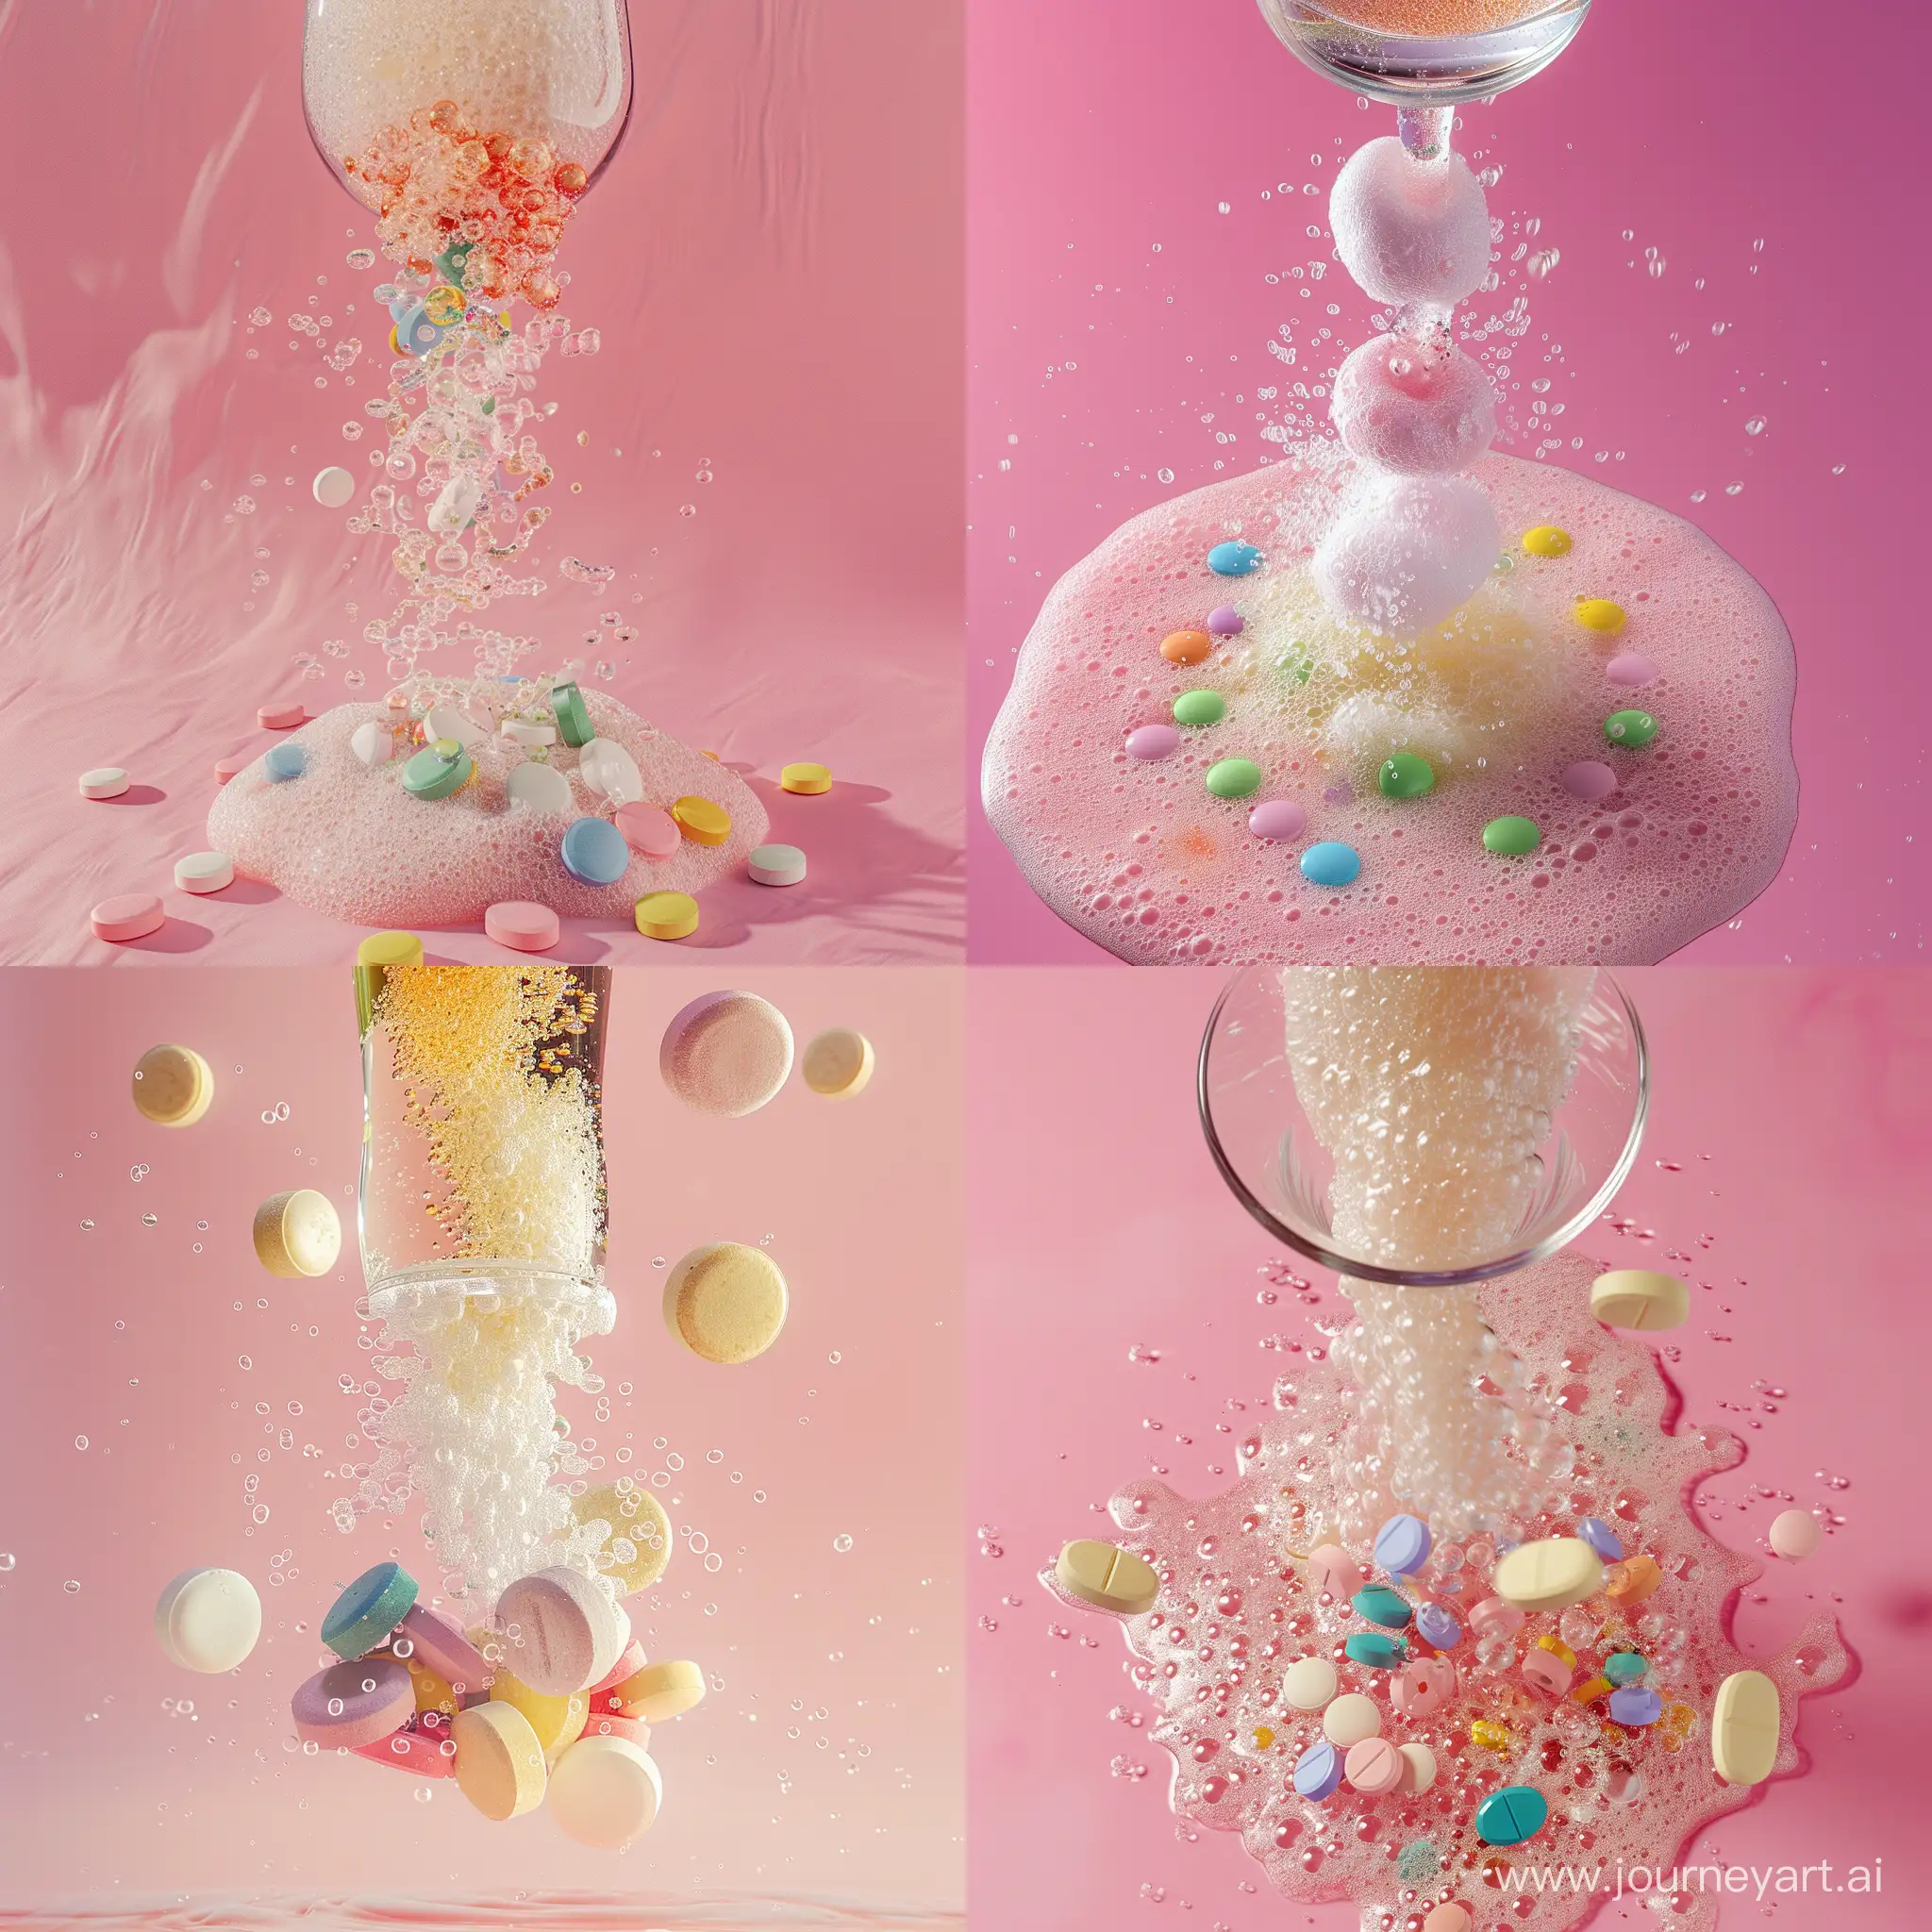 Effervescent-Soda-Reaction-Colorful-Tablets-Dissolving-in-Fizzy-Drink